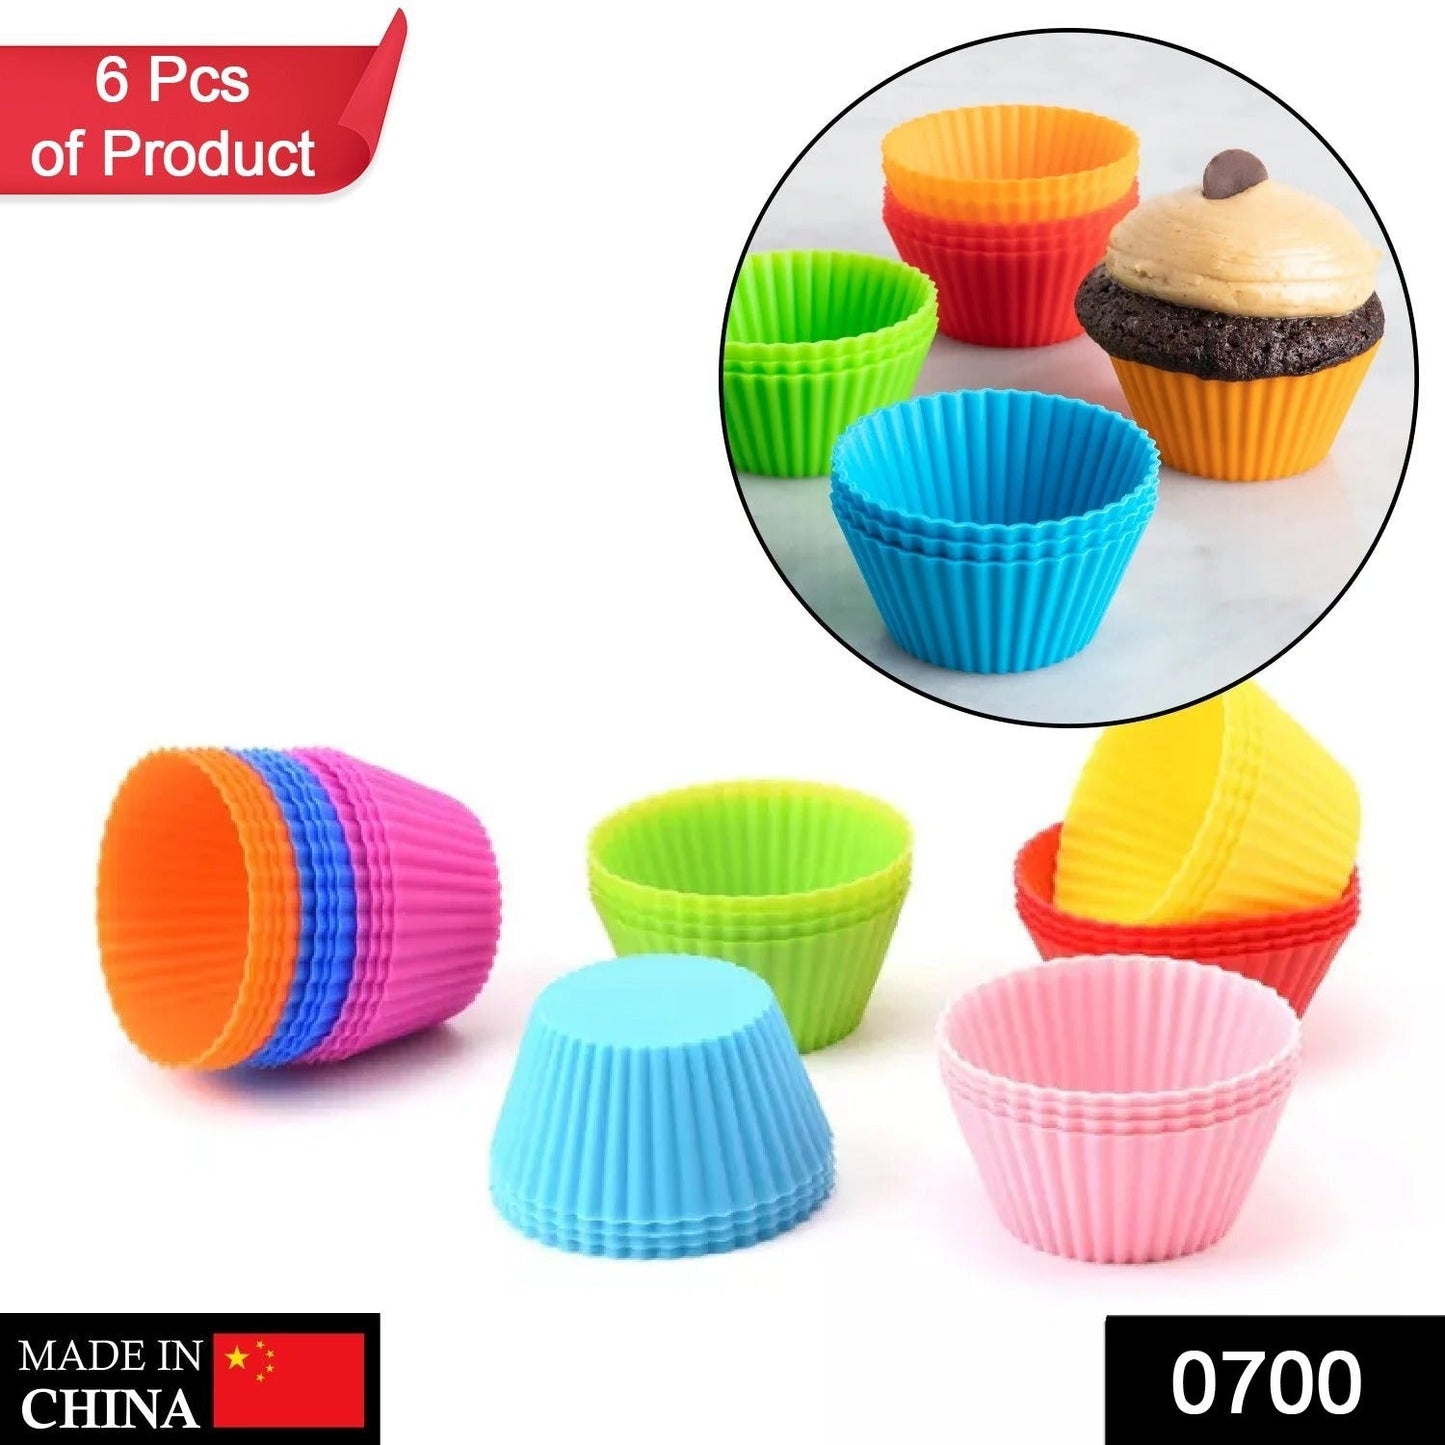 Silicone Cupcake Shaped Baking Mold Fondant Cake Tool Chocolate Candy Cookies Pastry Soap Moulds (6 Pc)